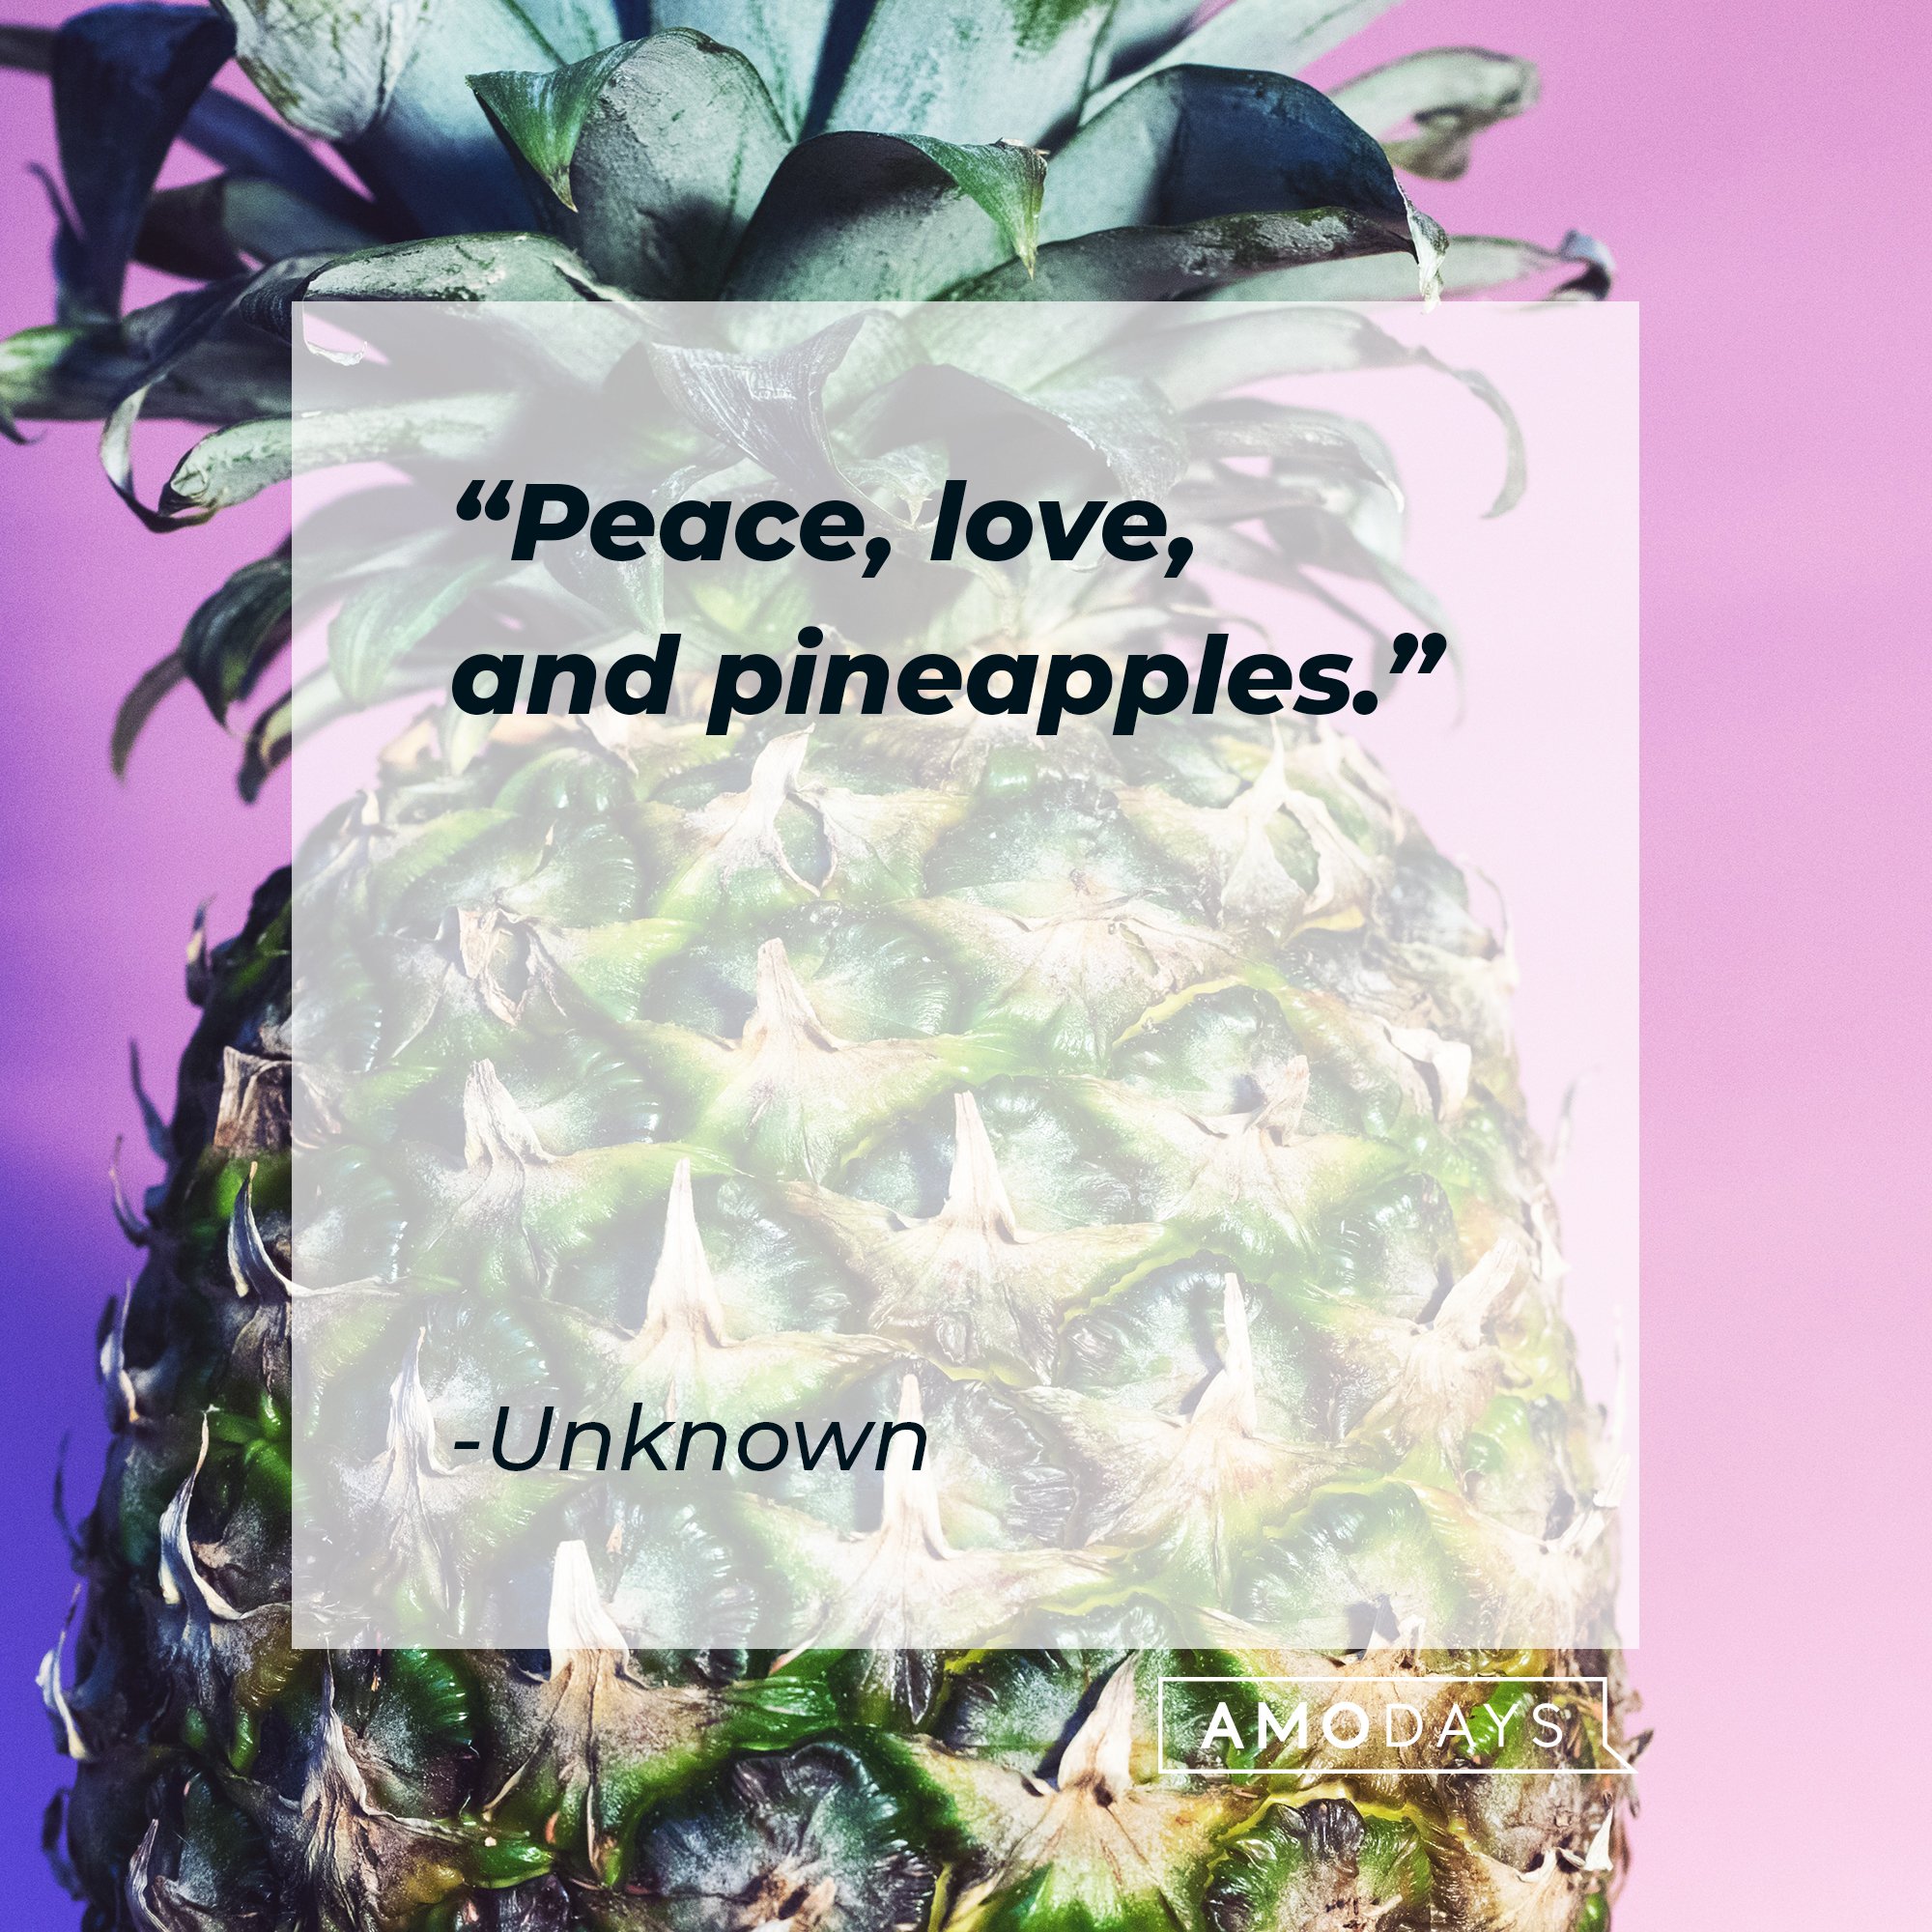 A quote from an unknown source: "Peace, love, and pineapples." | Image: AmoD